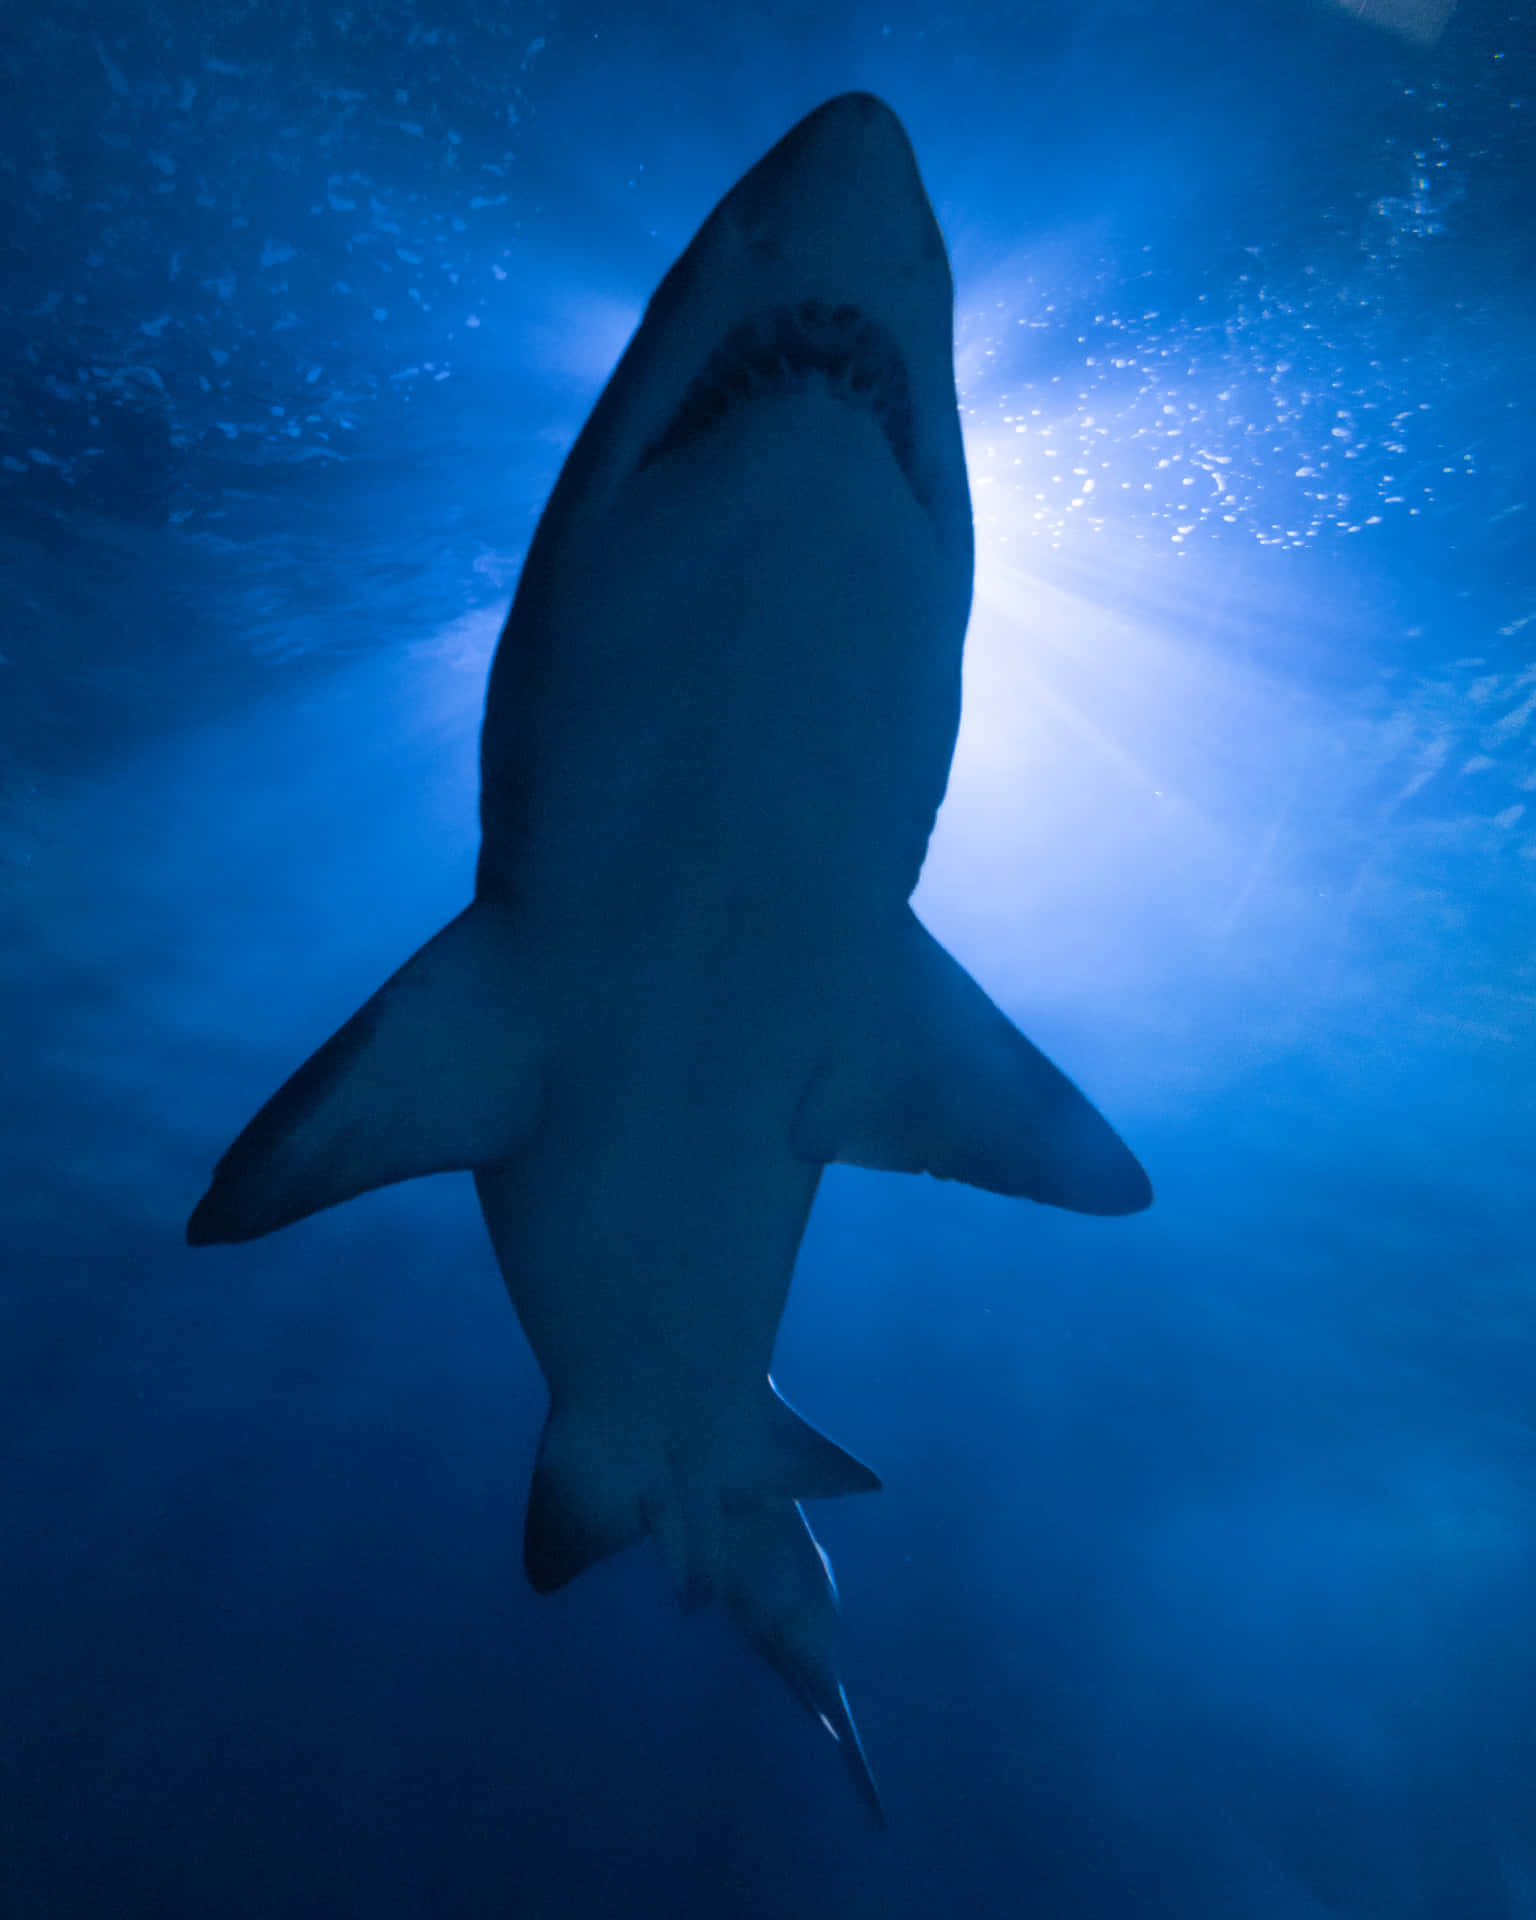 "One of Nature's Magnificent Creatures - The Great White Shark"